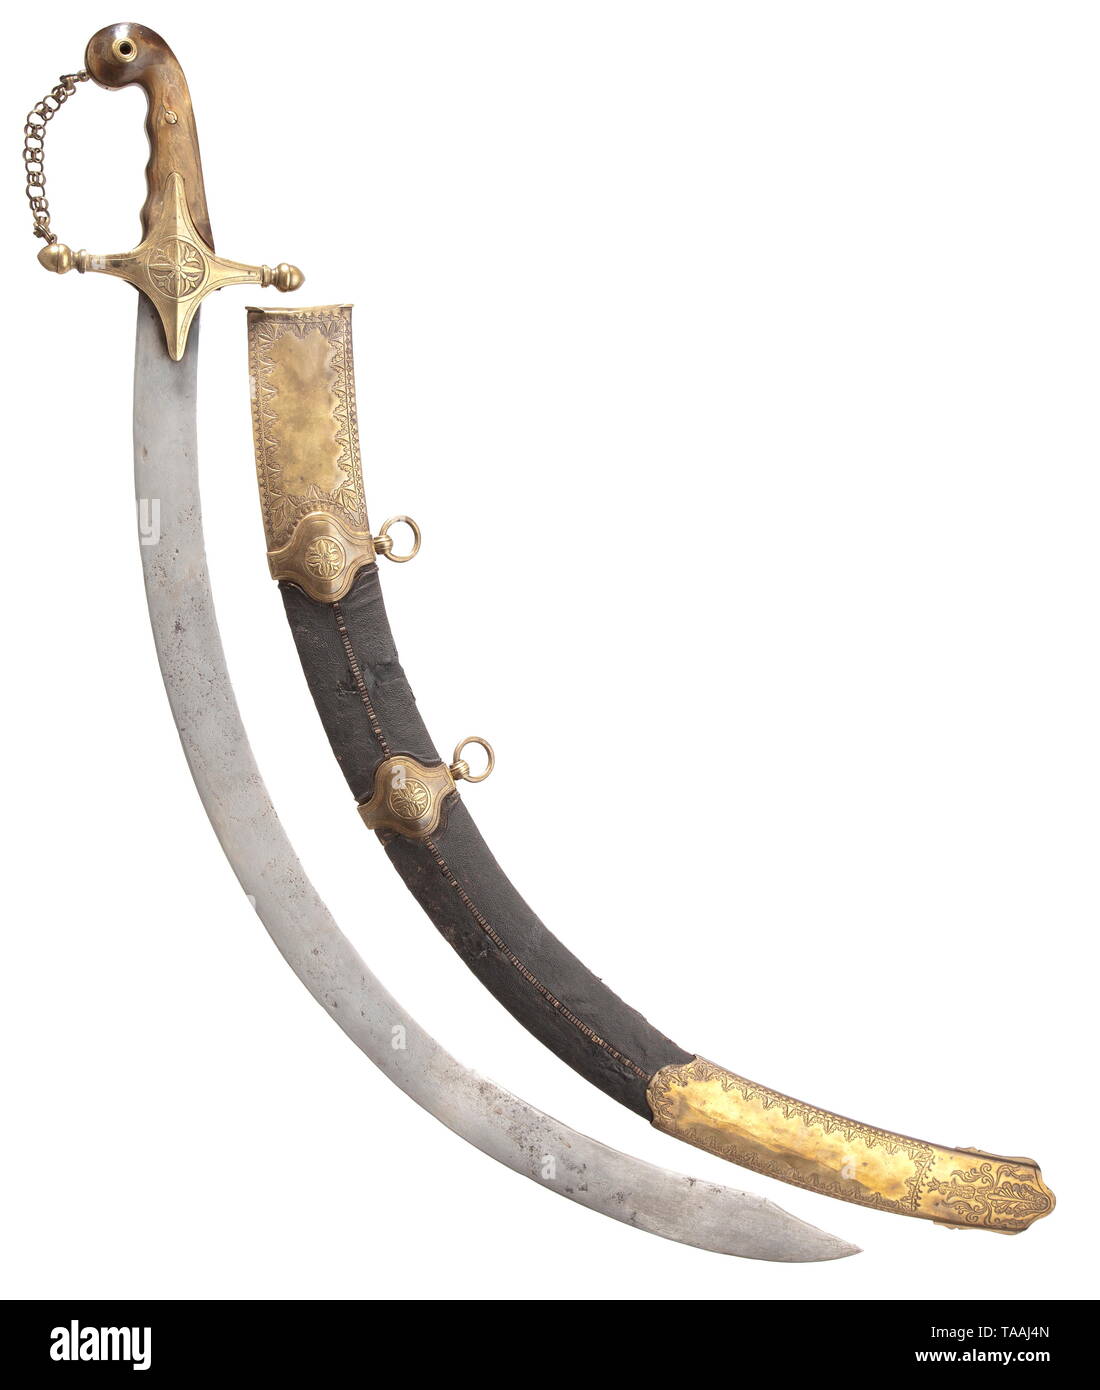 A Damascus presentation sabre for a high-ranking officer, from the Wars of Liberation, circa 1813 Broad, strongly curved blade of wild Damascus (pitting) with a protrusion and pandour point, the manufacturer's mark in the shape of four juxtaposed upright crescents on the obverse. Large gilt non-ferrous metal hilt with chain and riveted horn grip panels (damaged). In the original scabbard, covered in blackened ray skin, gilt non-ferrous metal fittings with a punched palmette frieze, two movable suspension rings. Slightly damaged in places, showing signs of age. Length circa , Editorial-Use-Only Stock Photo